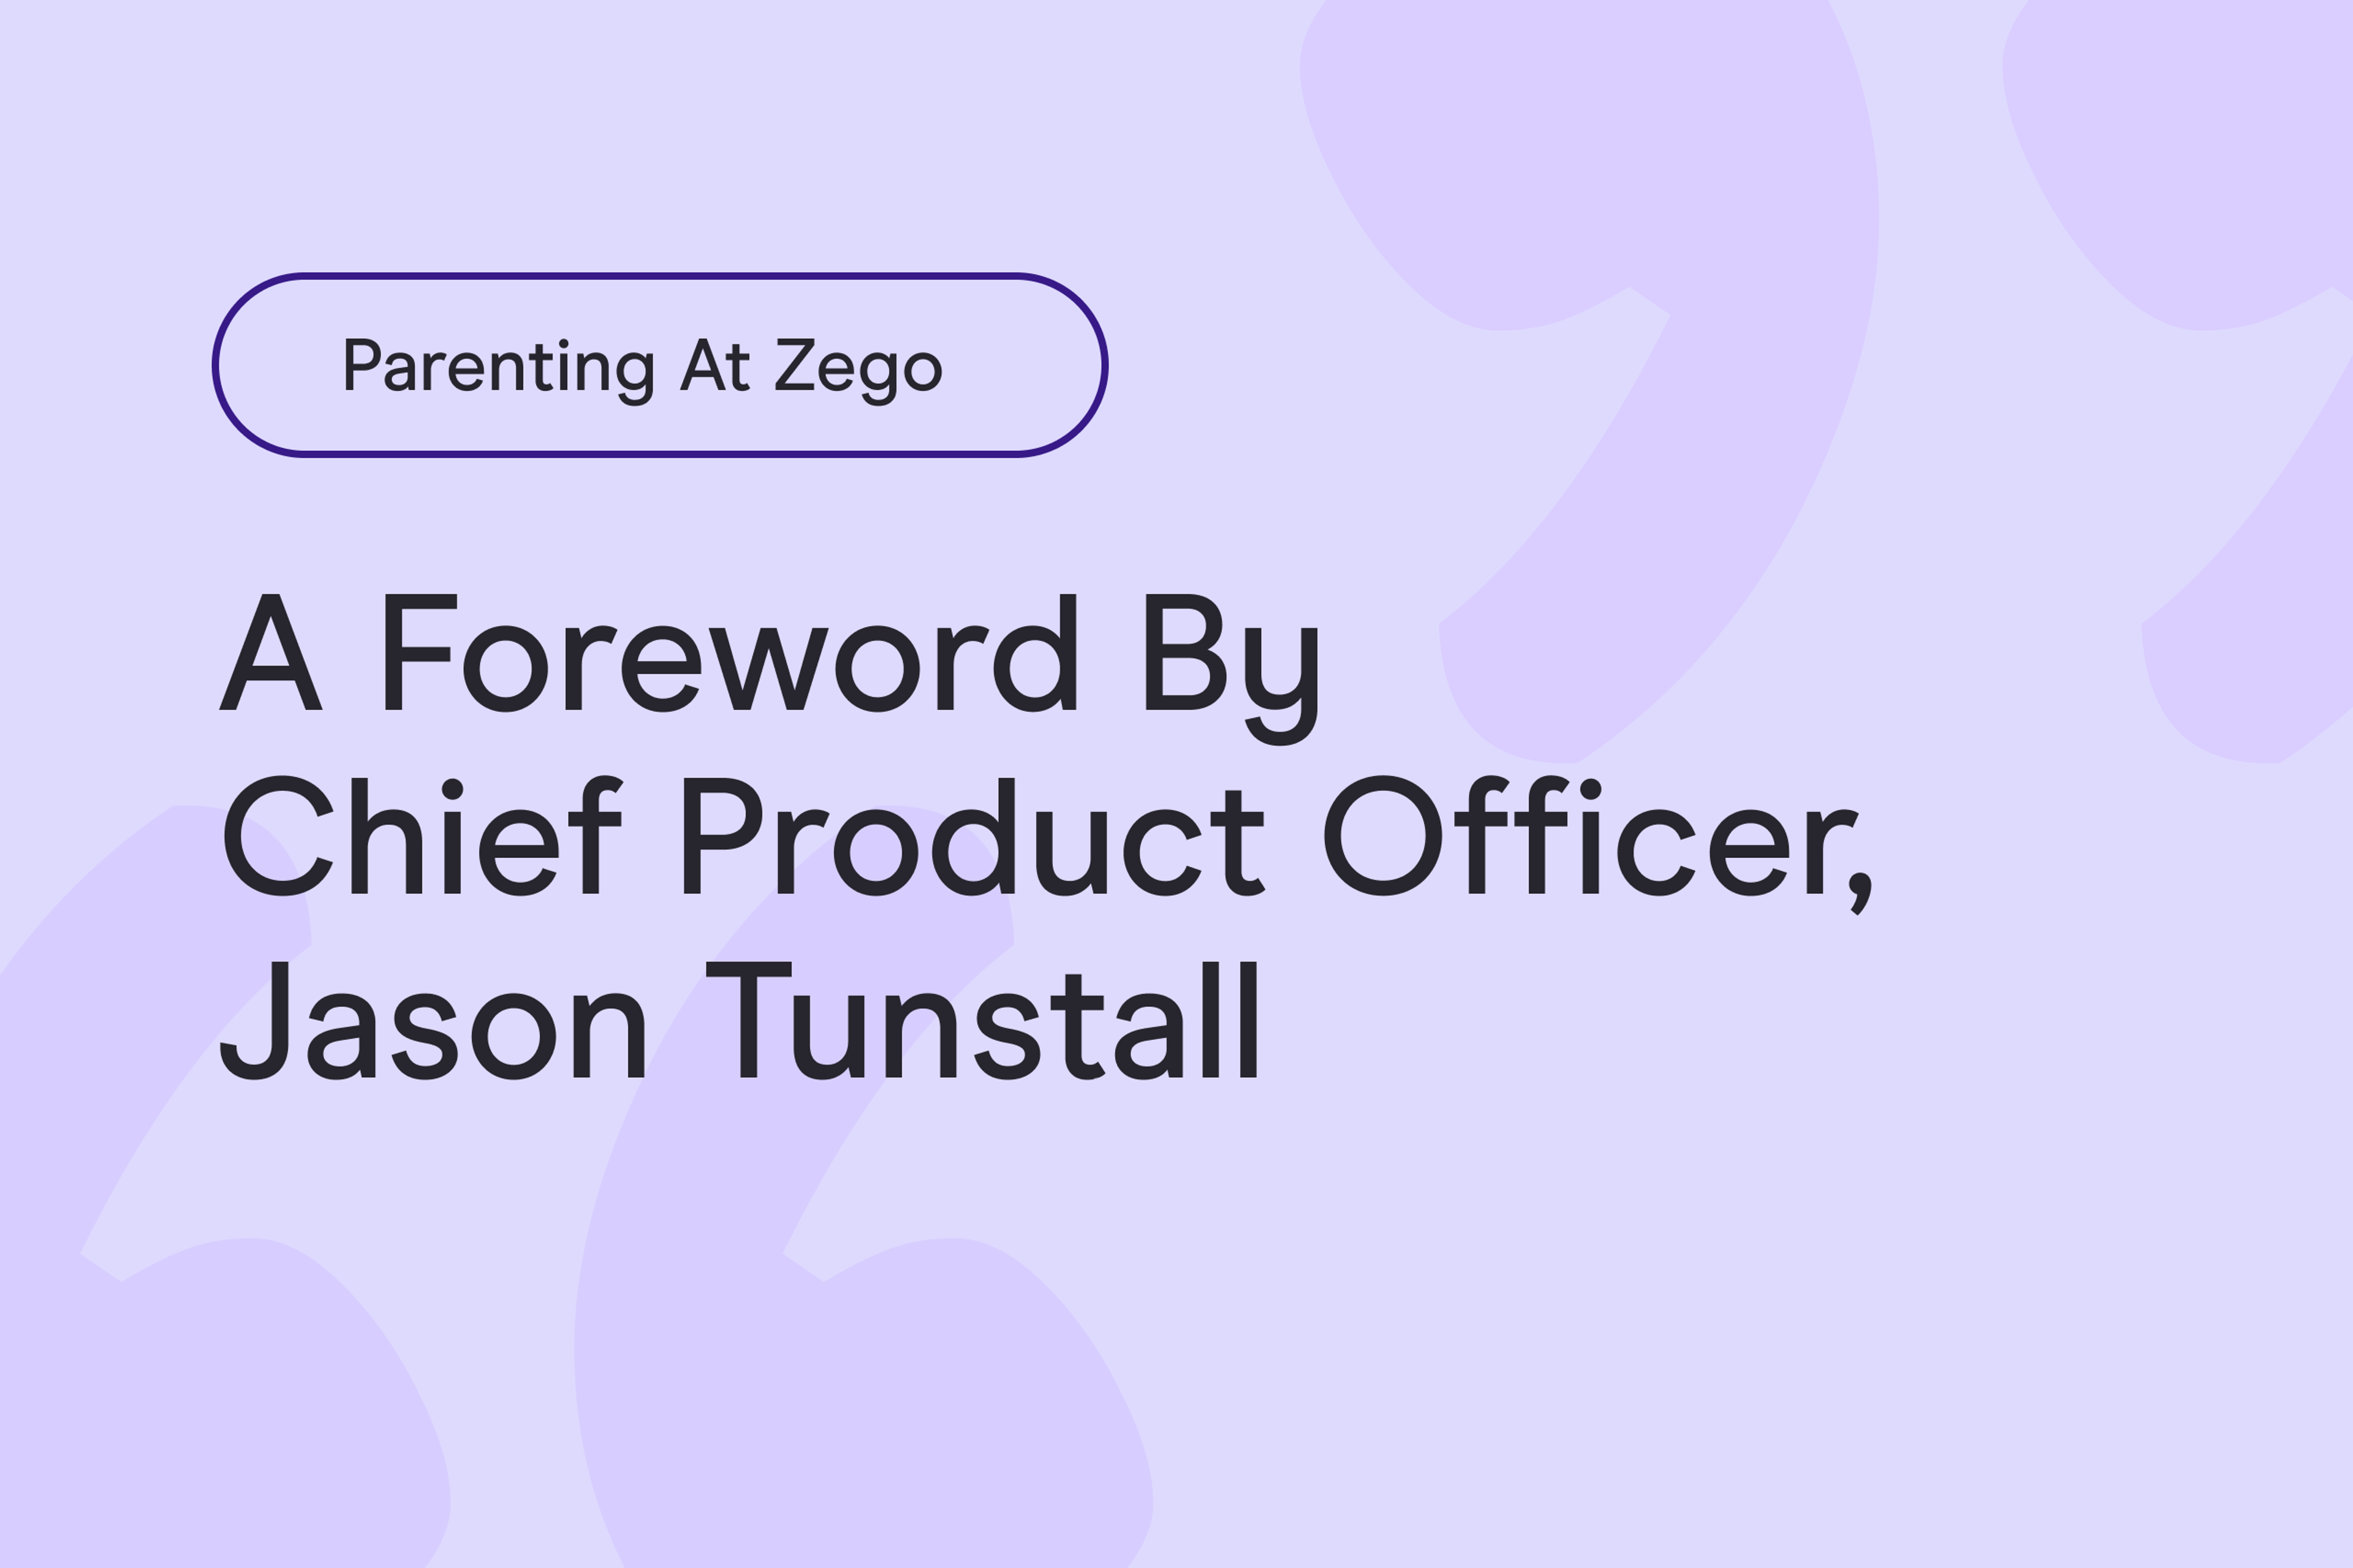 Parenting at Zego: a foreword by Chief Product Officer, Jason Tunstall